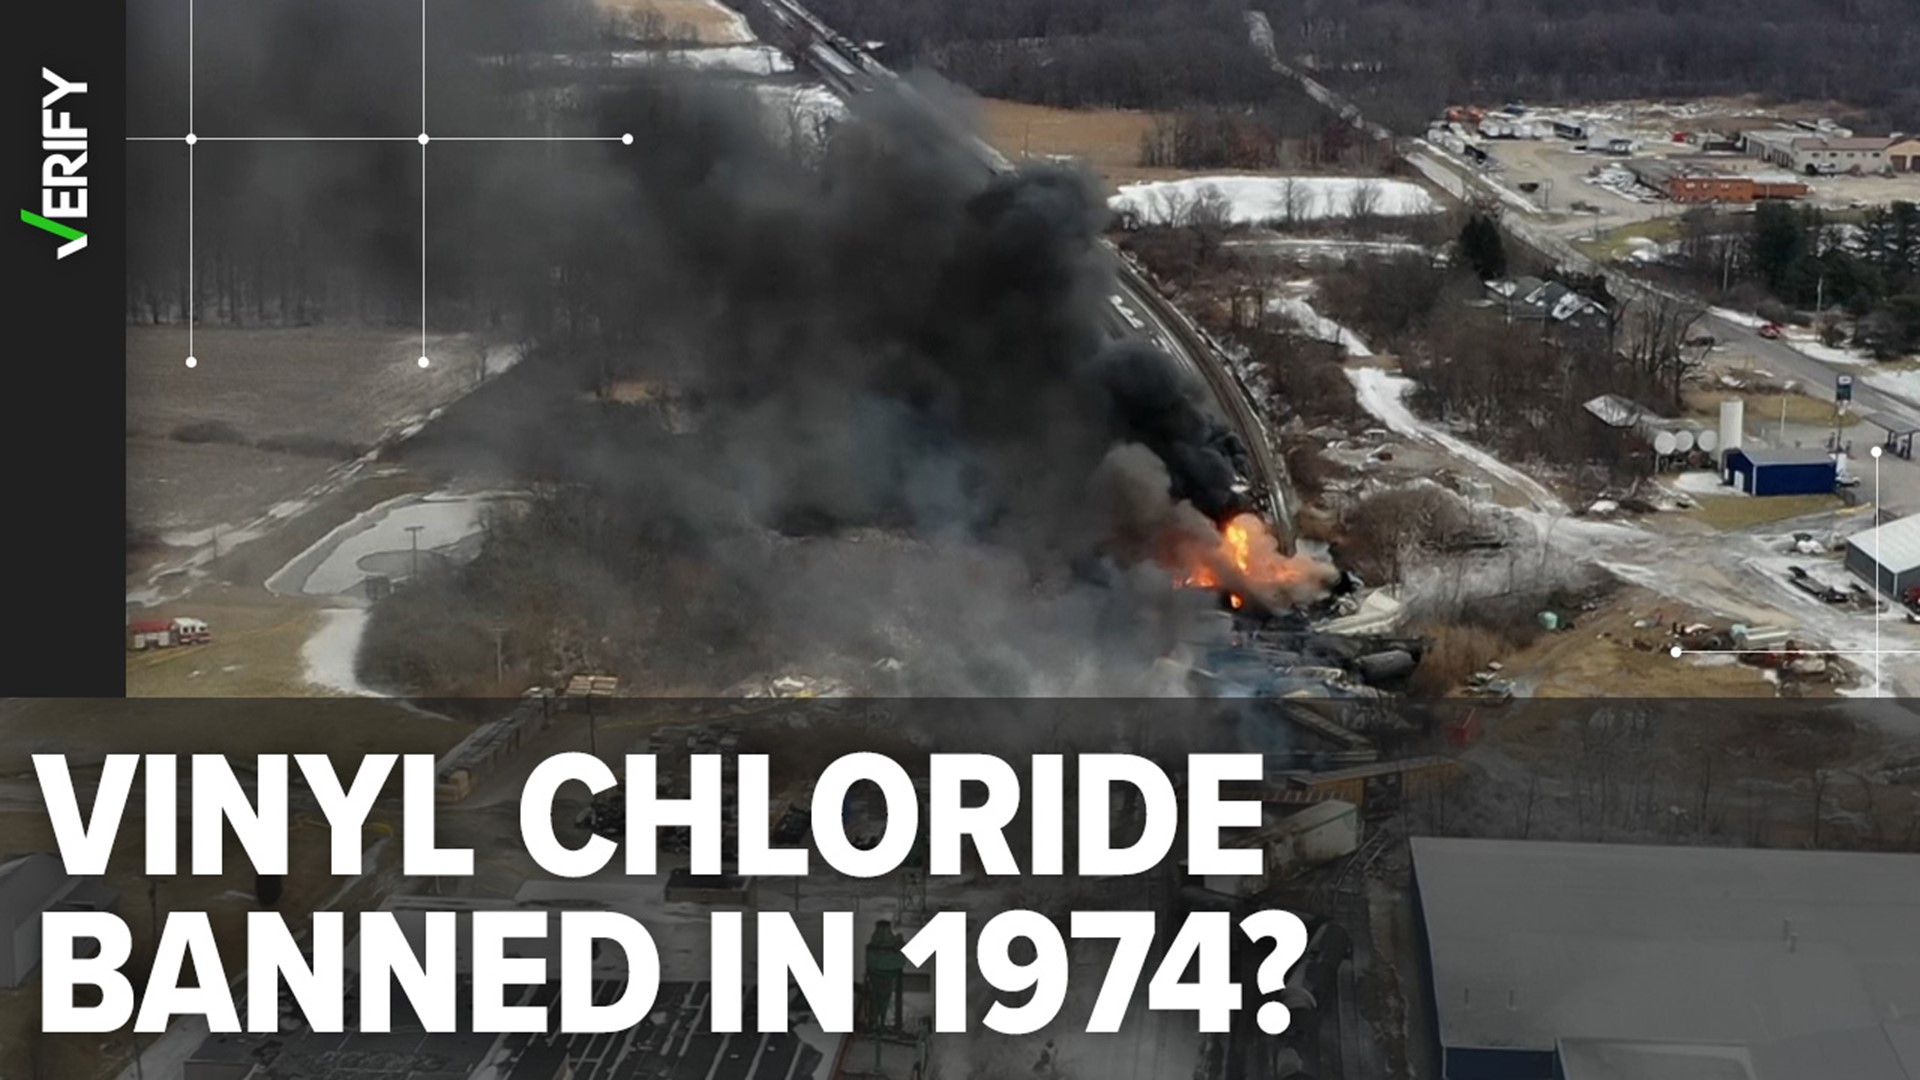 The train that derailed in Ohio was carrying a chemical called vinyl chloride, which some posts claim has been banned since 1974. That’s only true for some products.